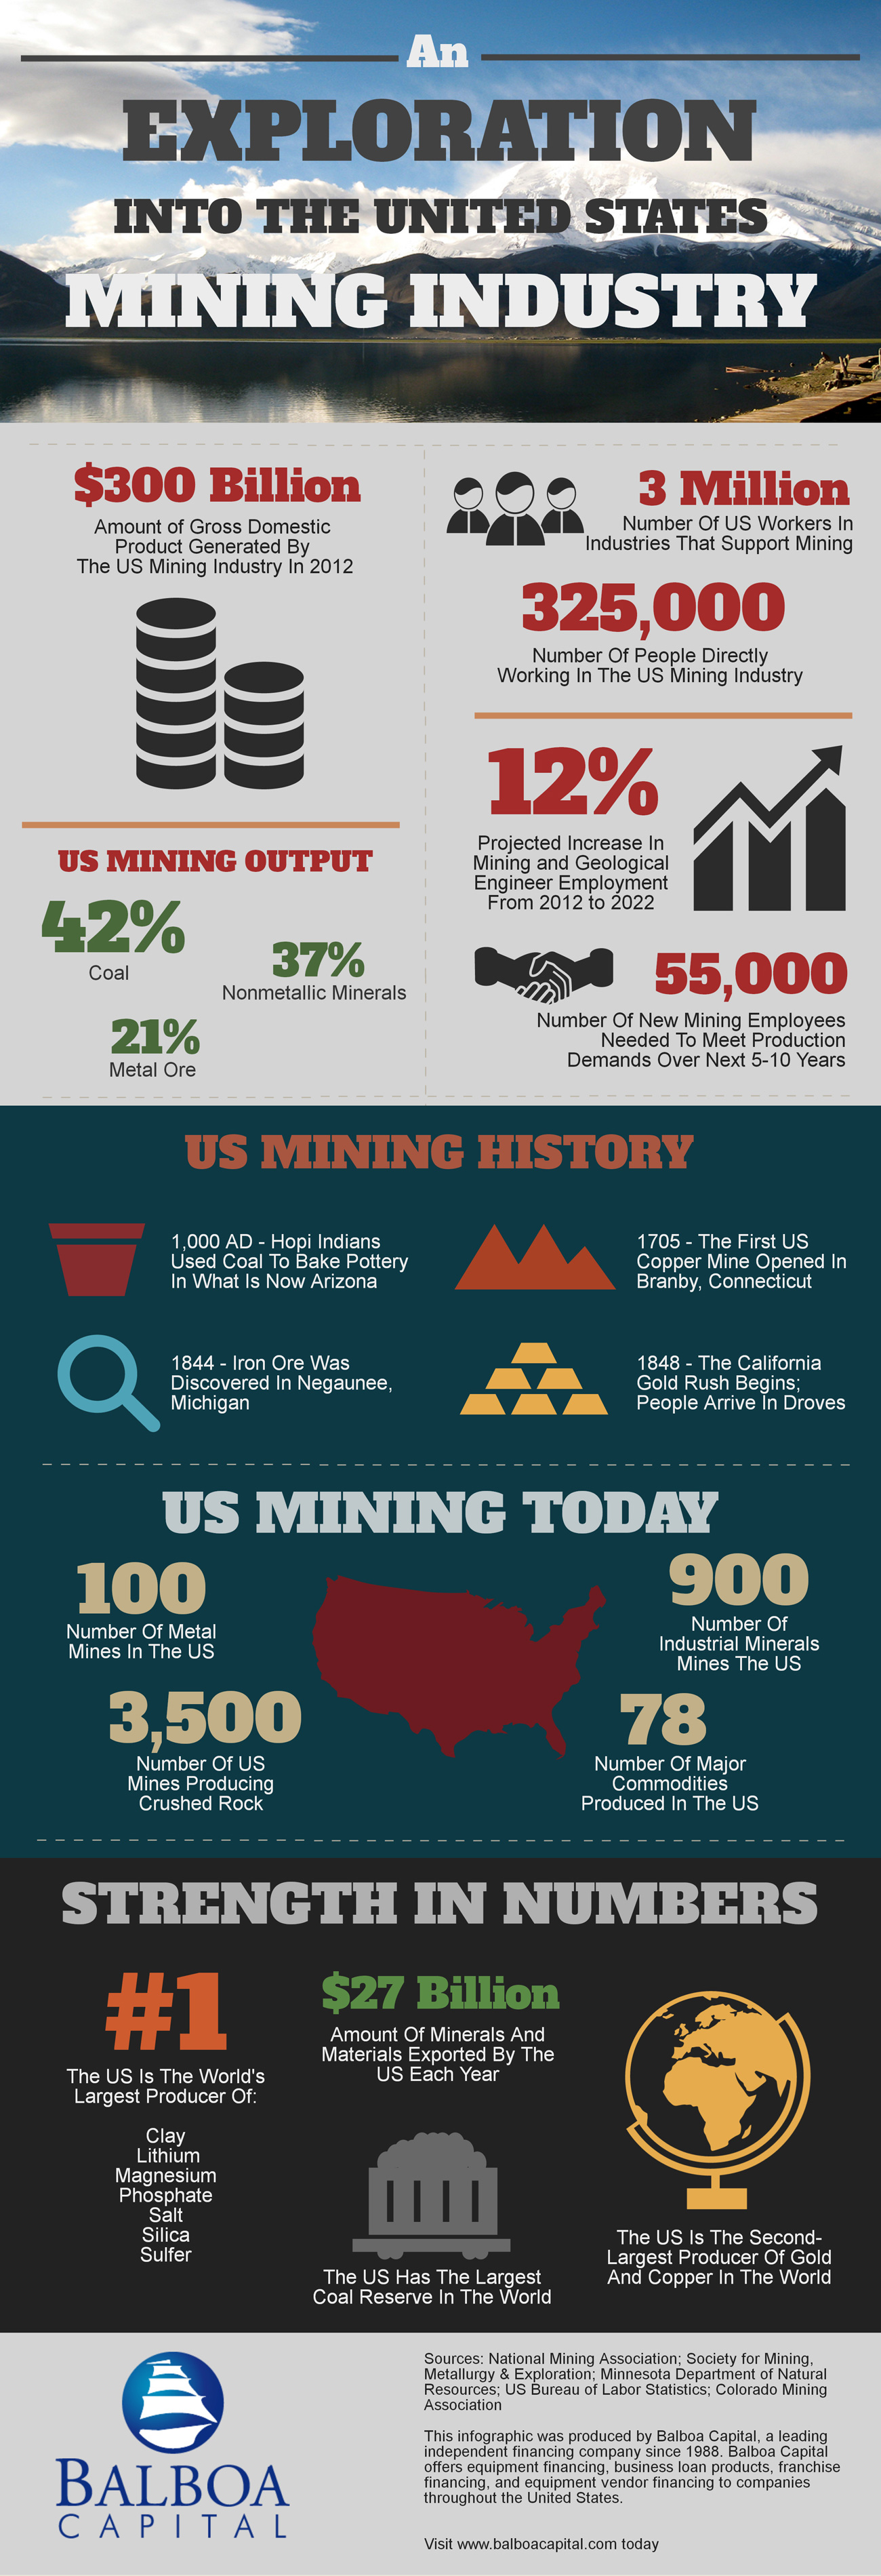 Mining Industry Infographic From Balboa Capital - Click To Enlarge